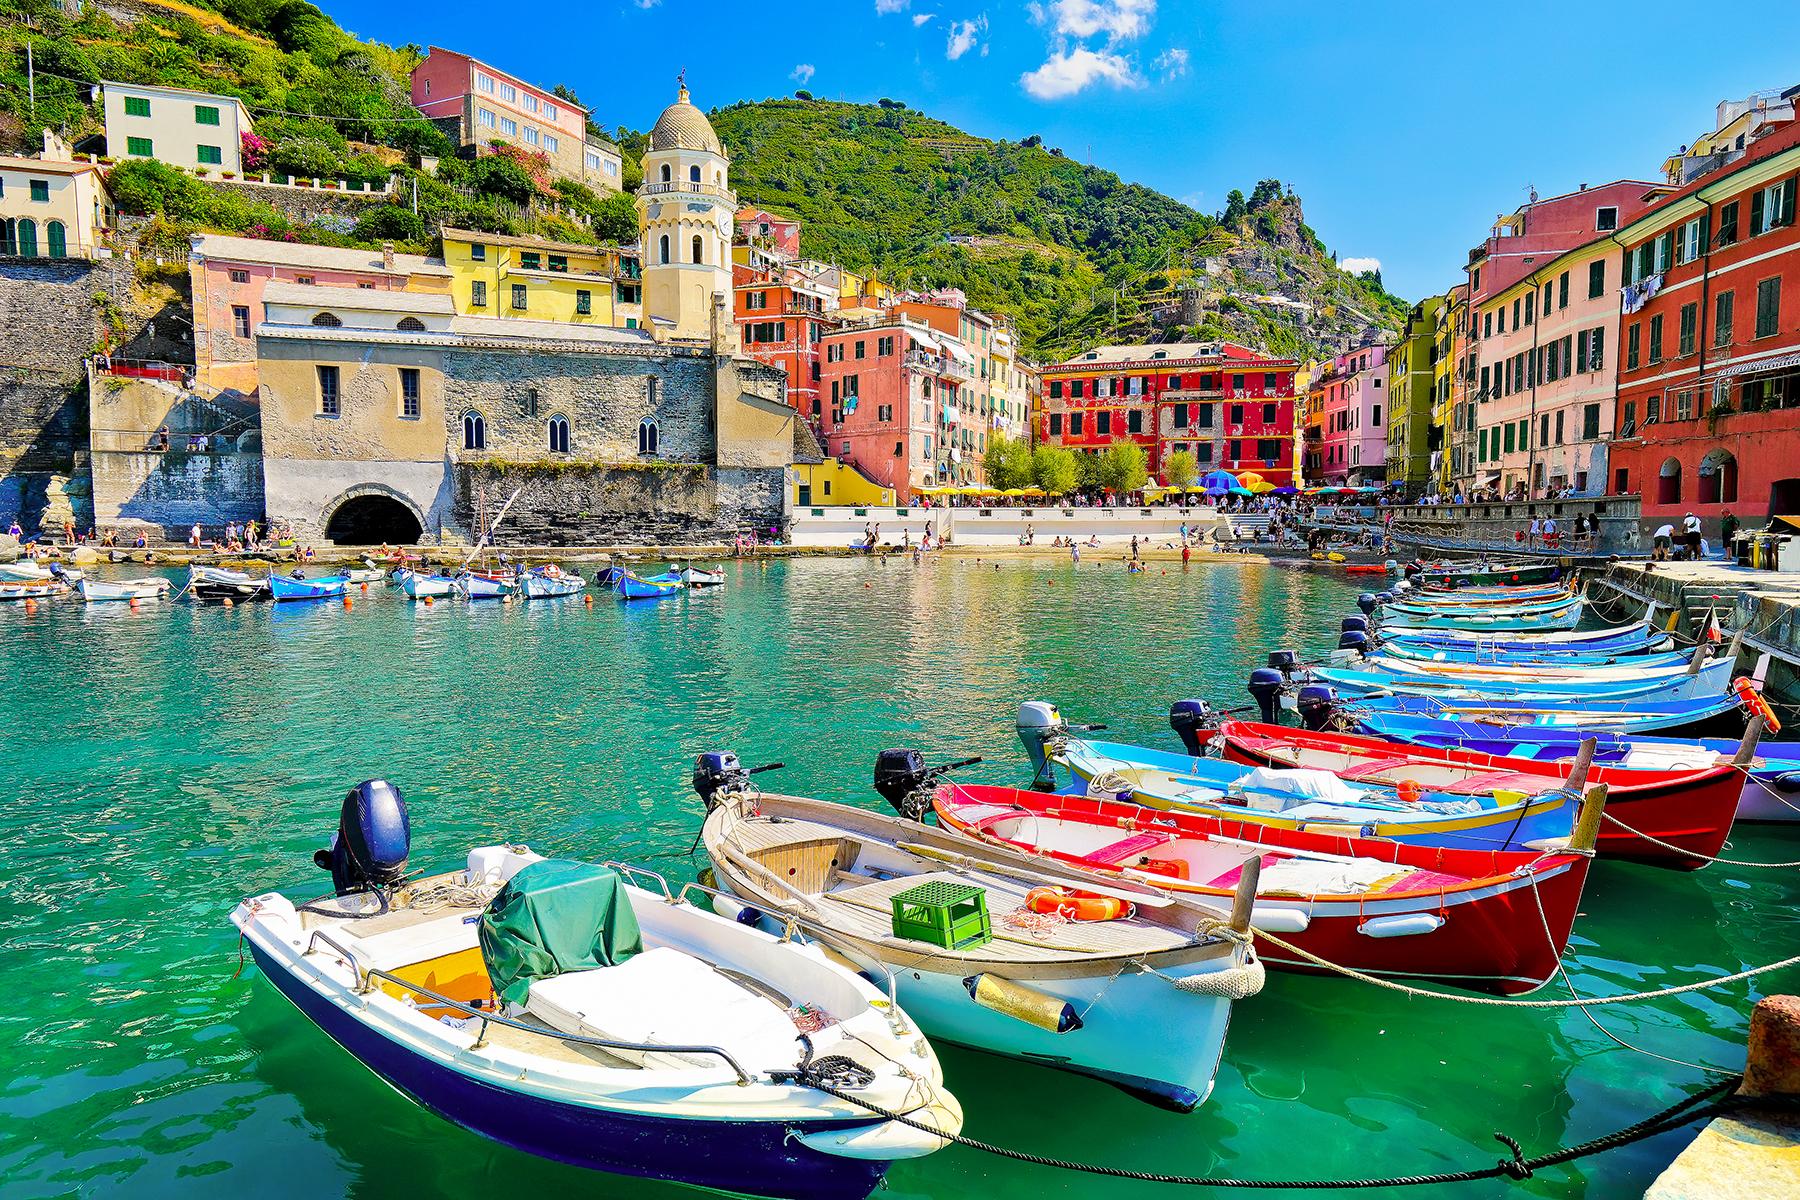 Top 22 Seaside Towns on the Italian Coast to Visit – Fodors Travel Guide